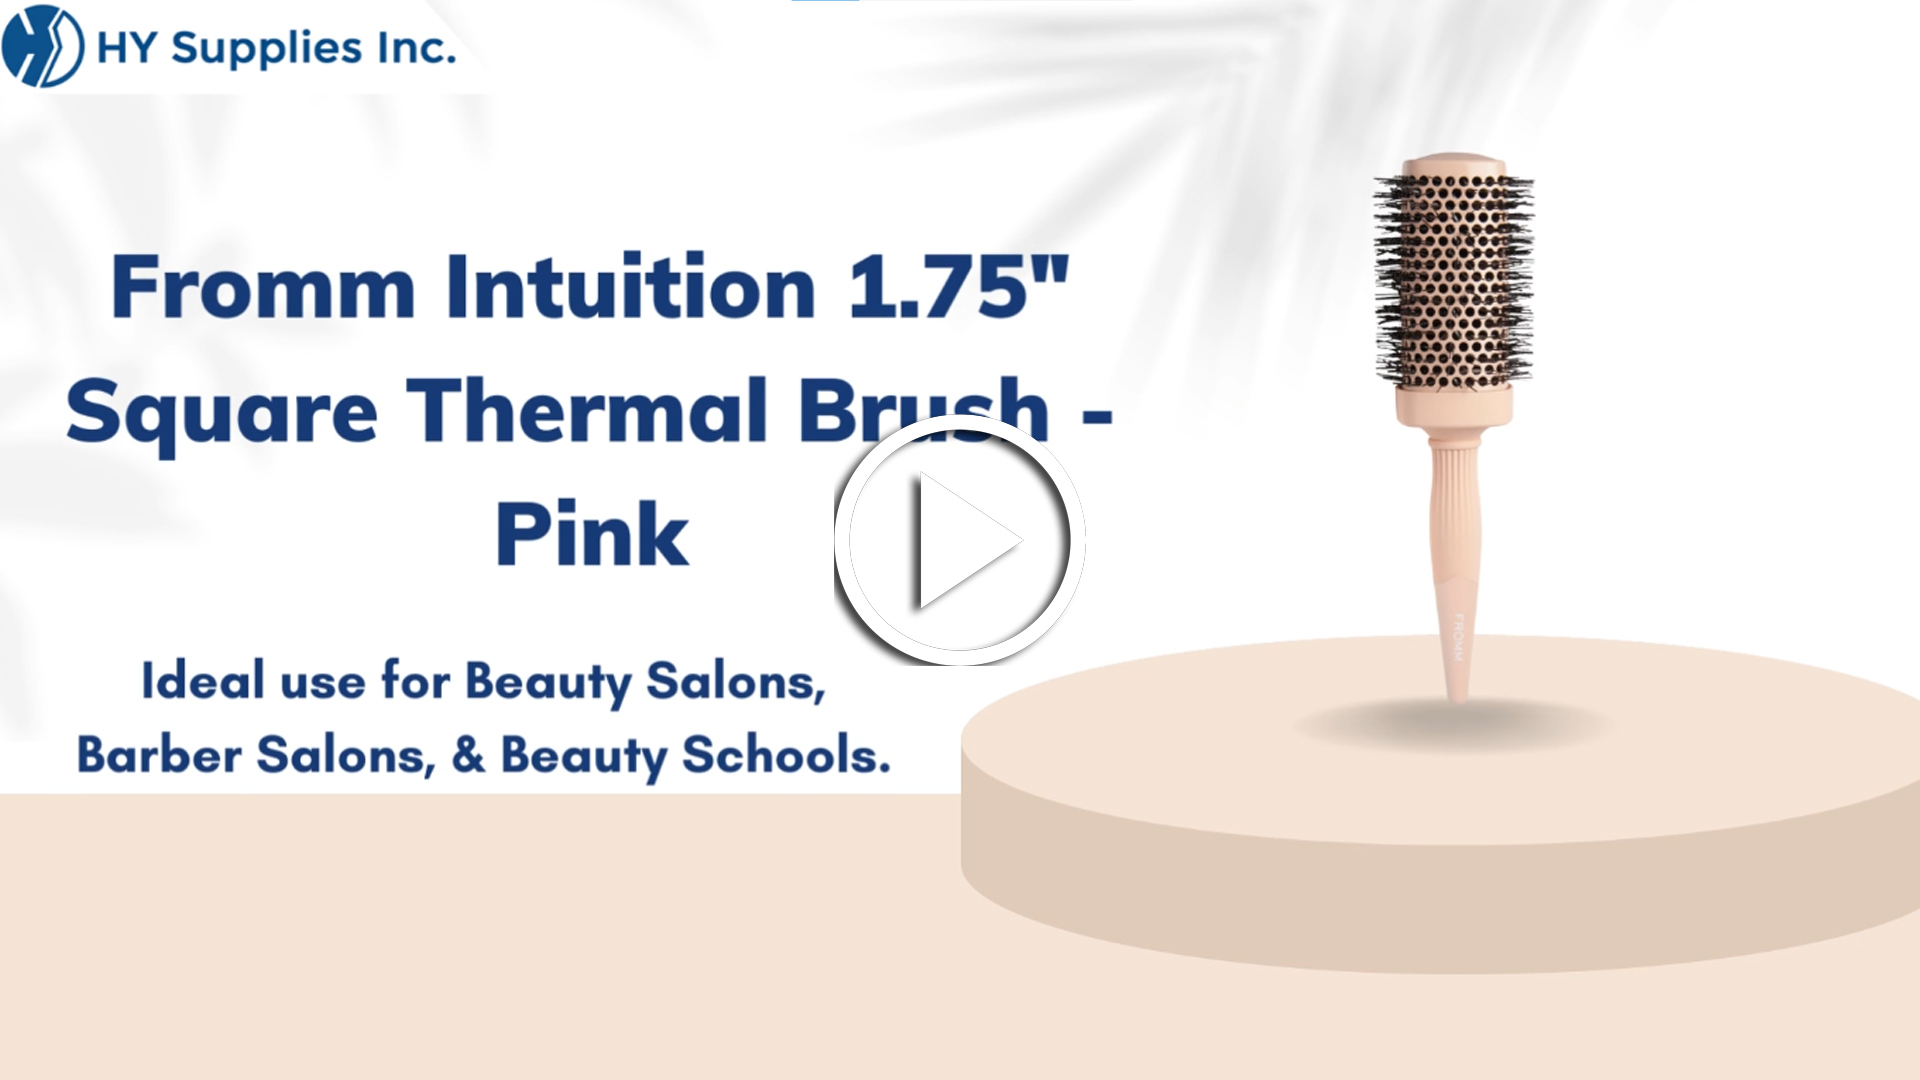 Fromm Intuition 1.75"Square Thermal Brush - Pink